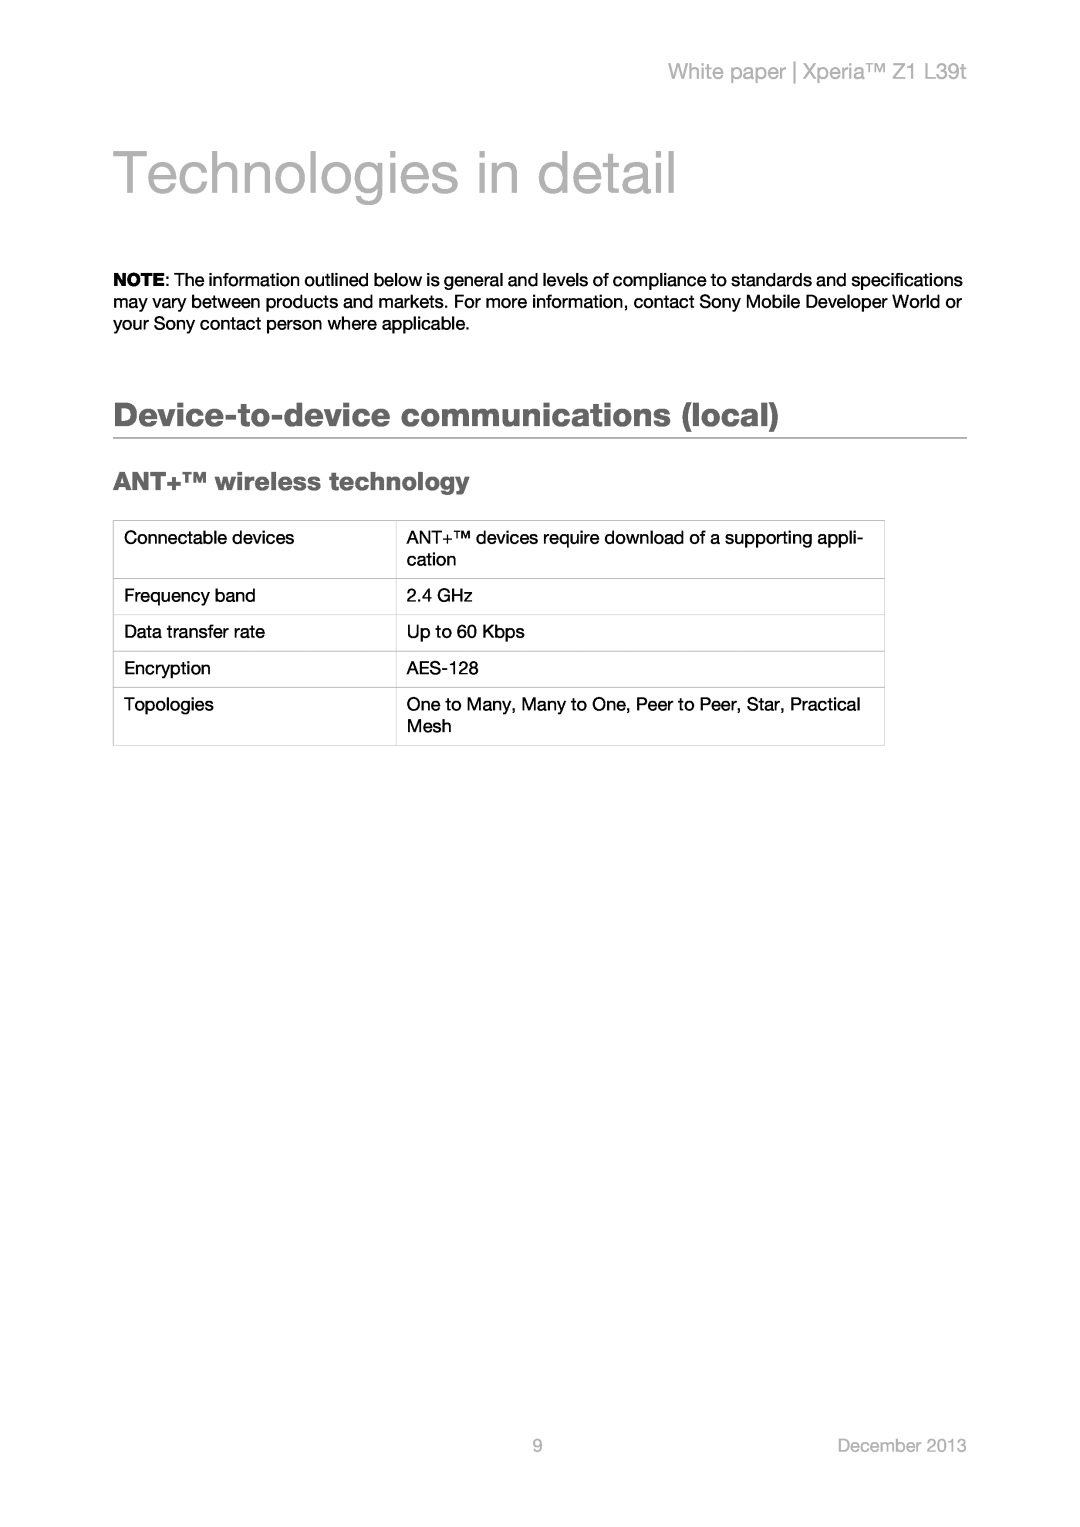 Sony L39t manual Technologies in detail, Device-to-device communications local, ANT+ wireless technology, December 